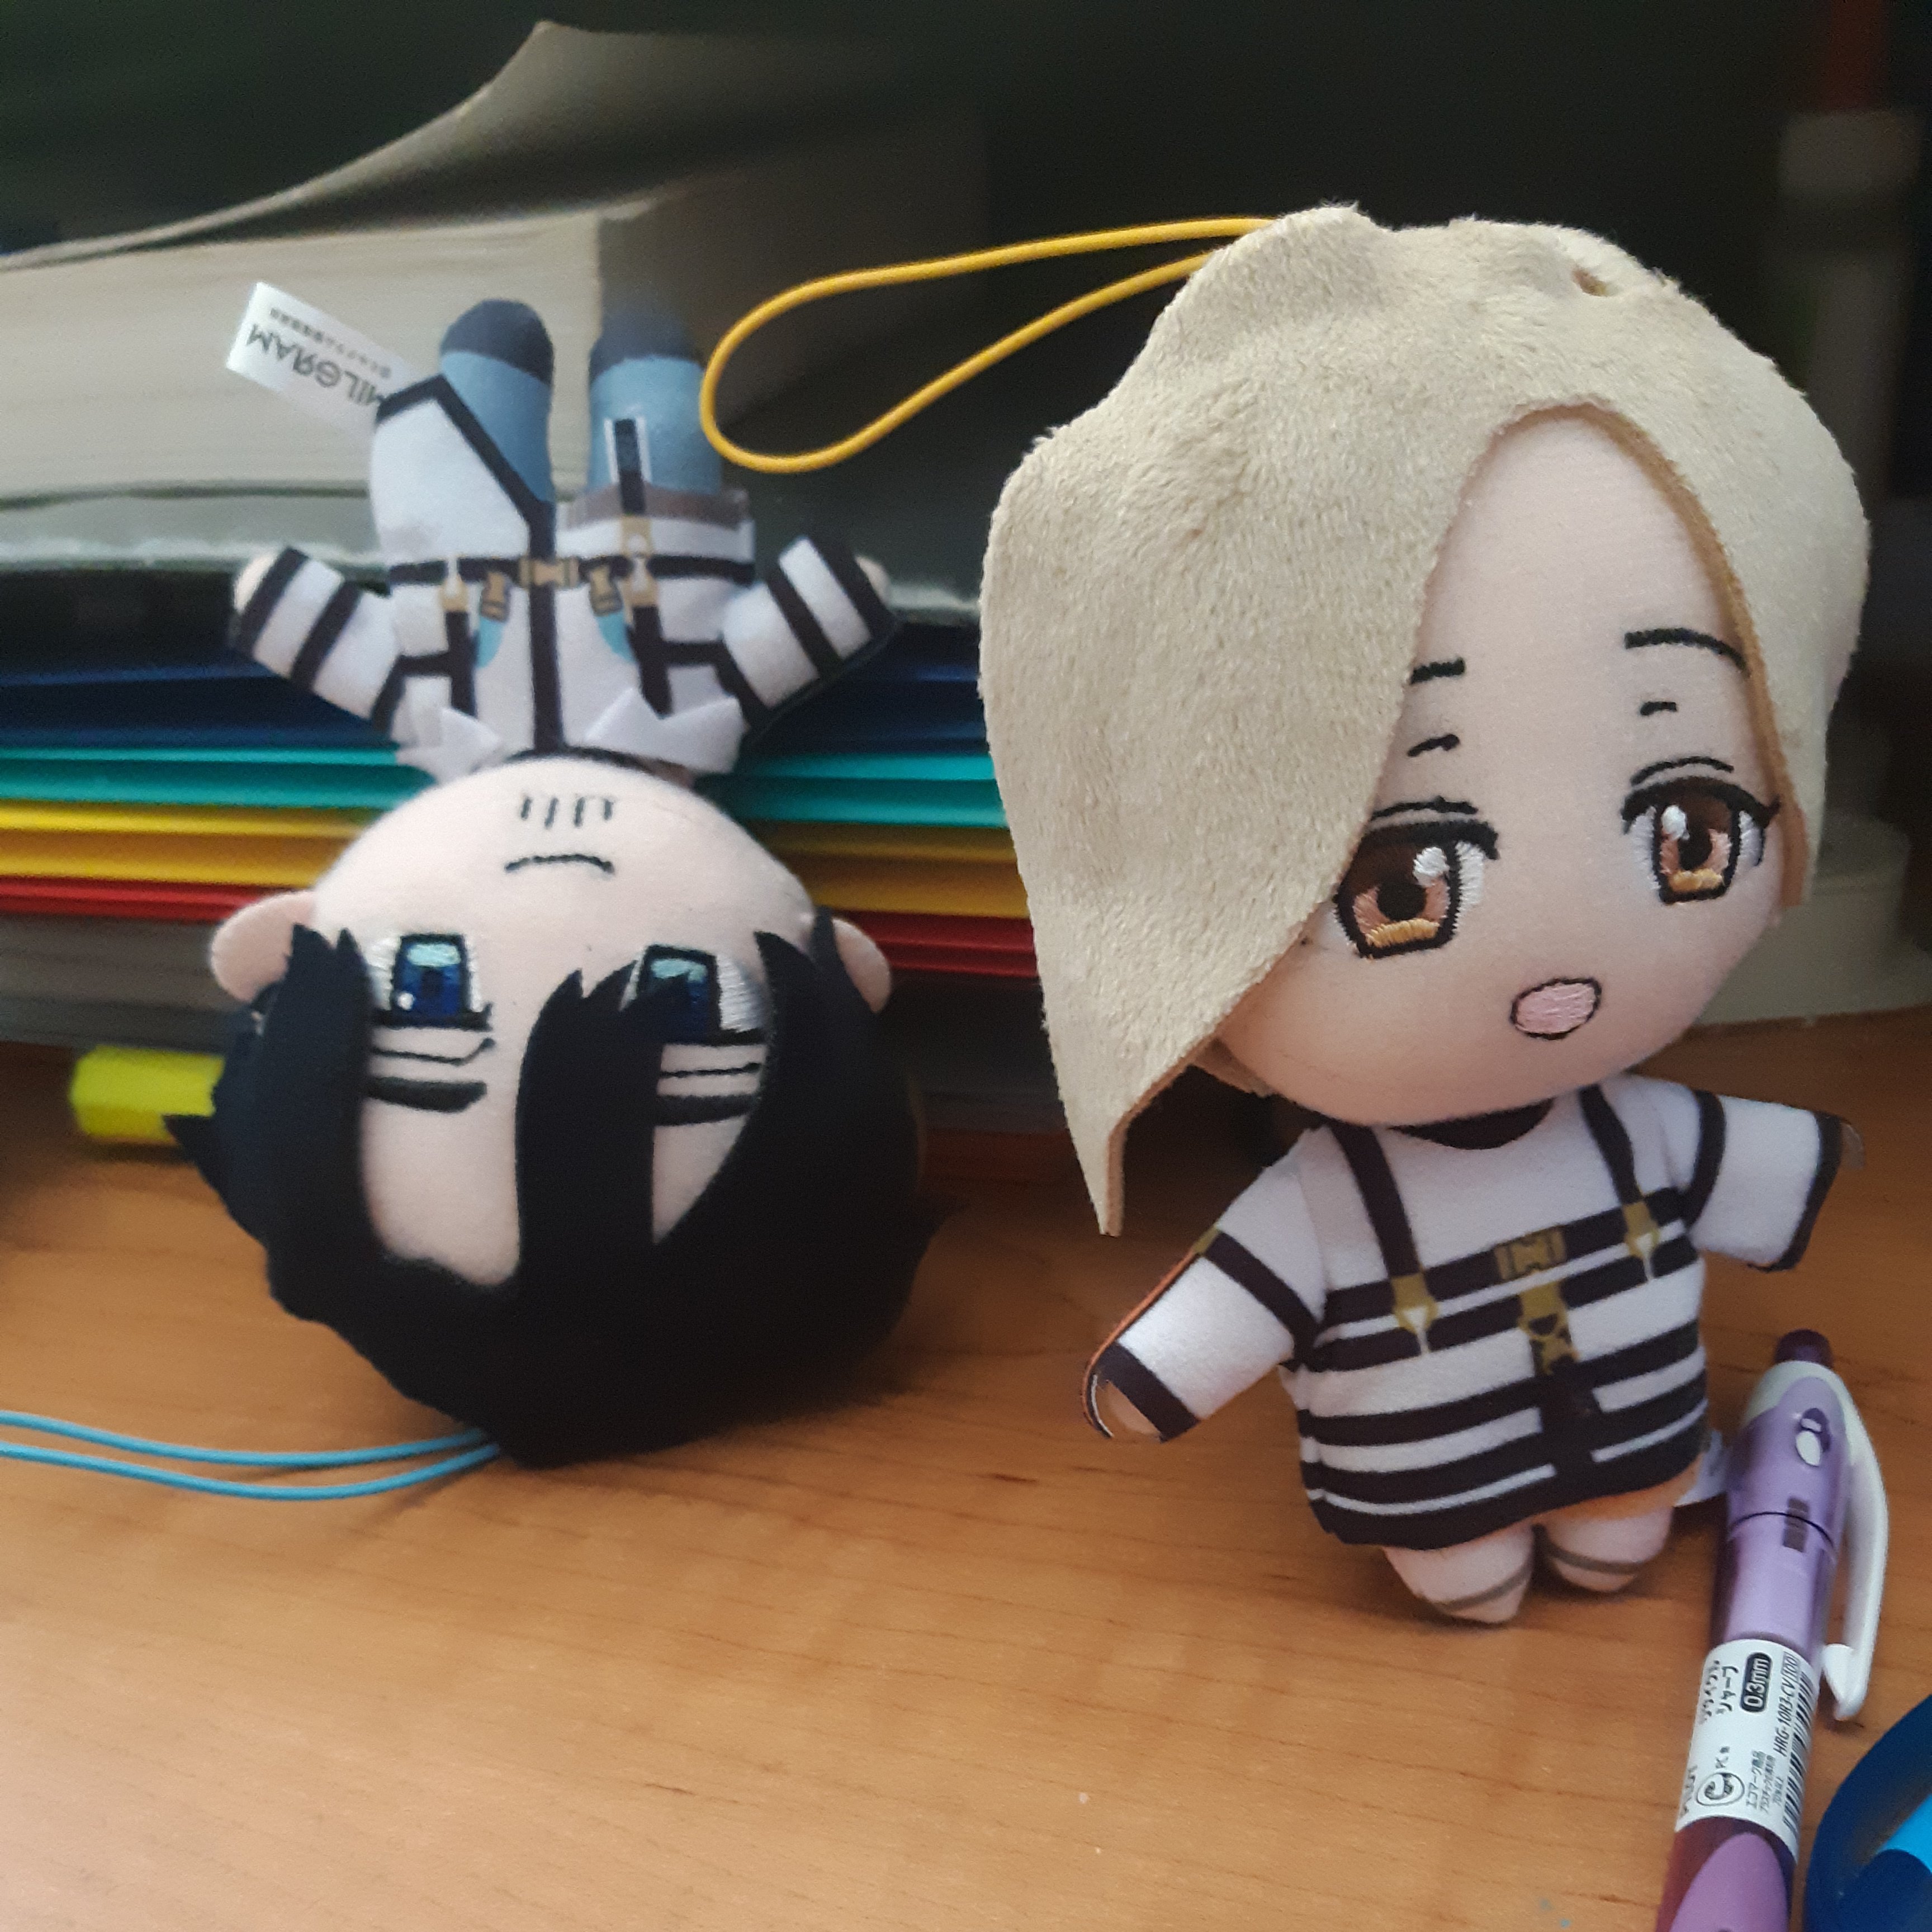 Pai - Kazui plushie on Twitter: "Random pictures with no context on my  phone of Milgram plushies dying on the inside. I'm Kazui...  (Ad link removed)" / Twitter